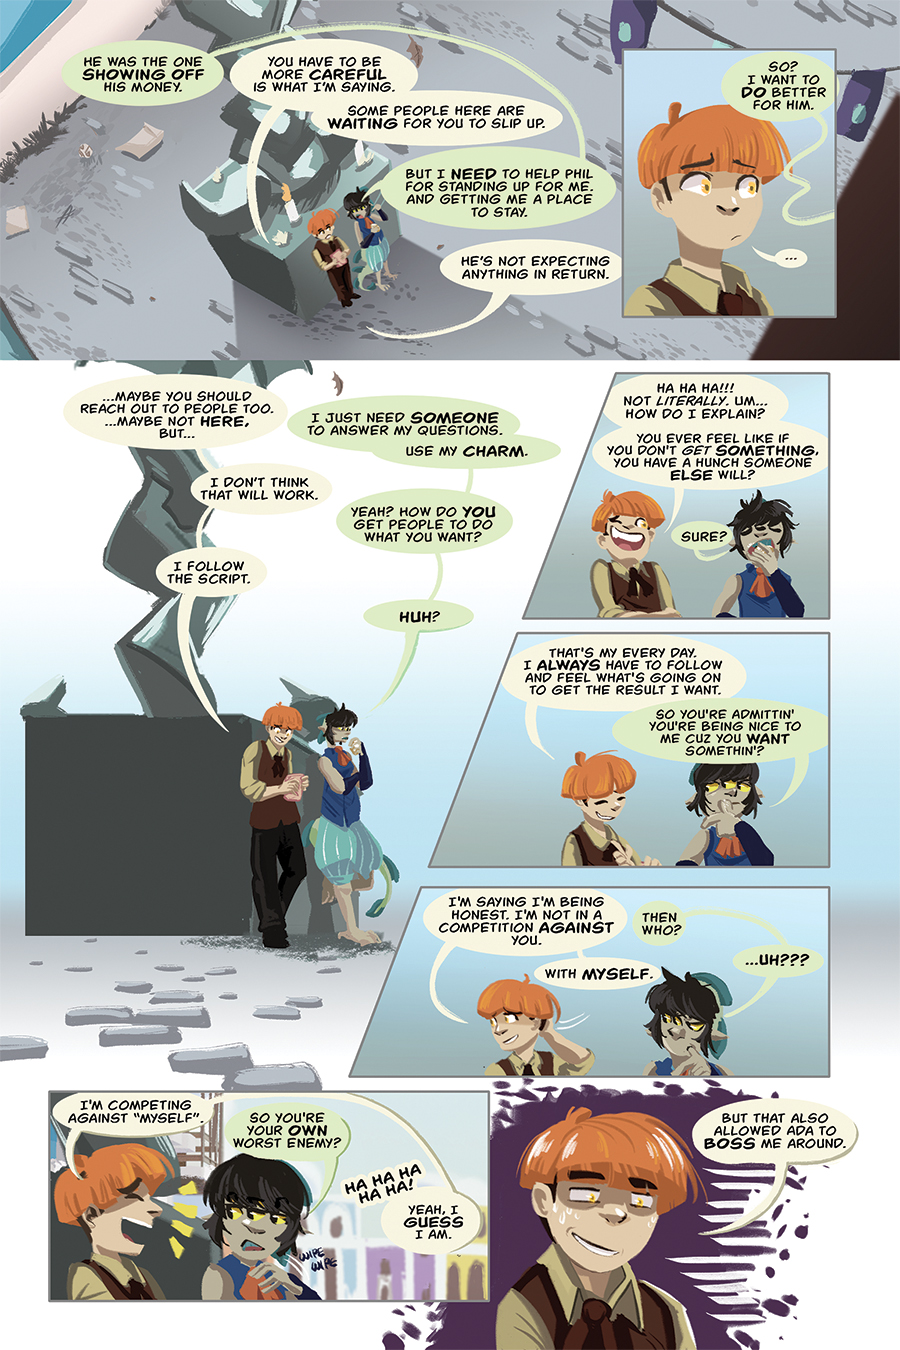 Chapter 8, page 14